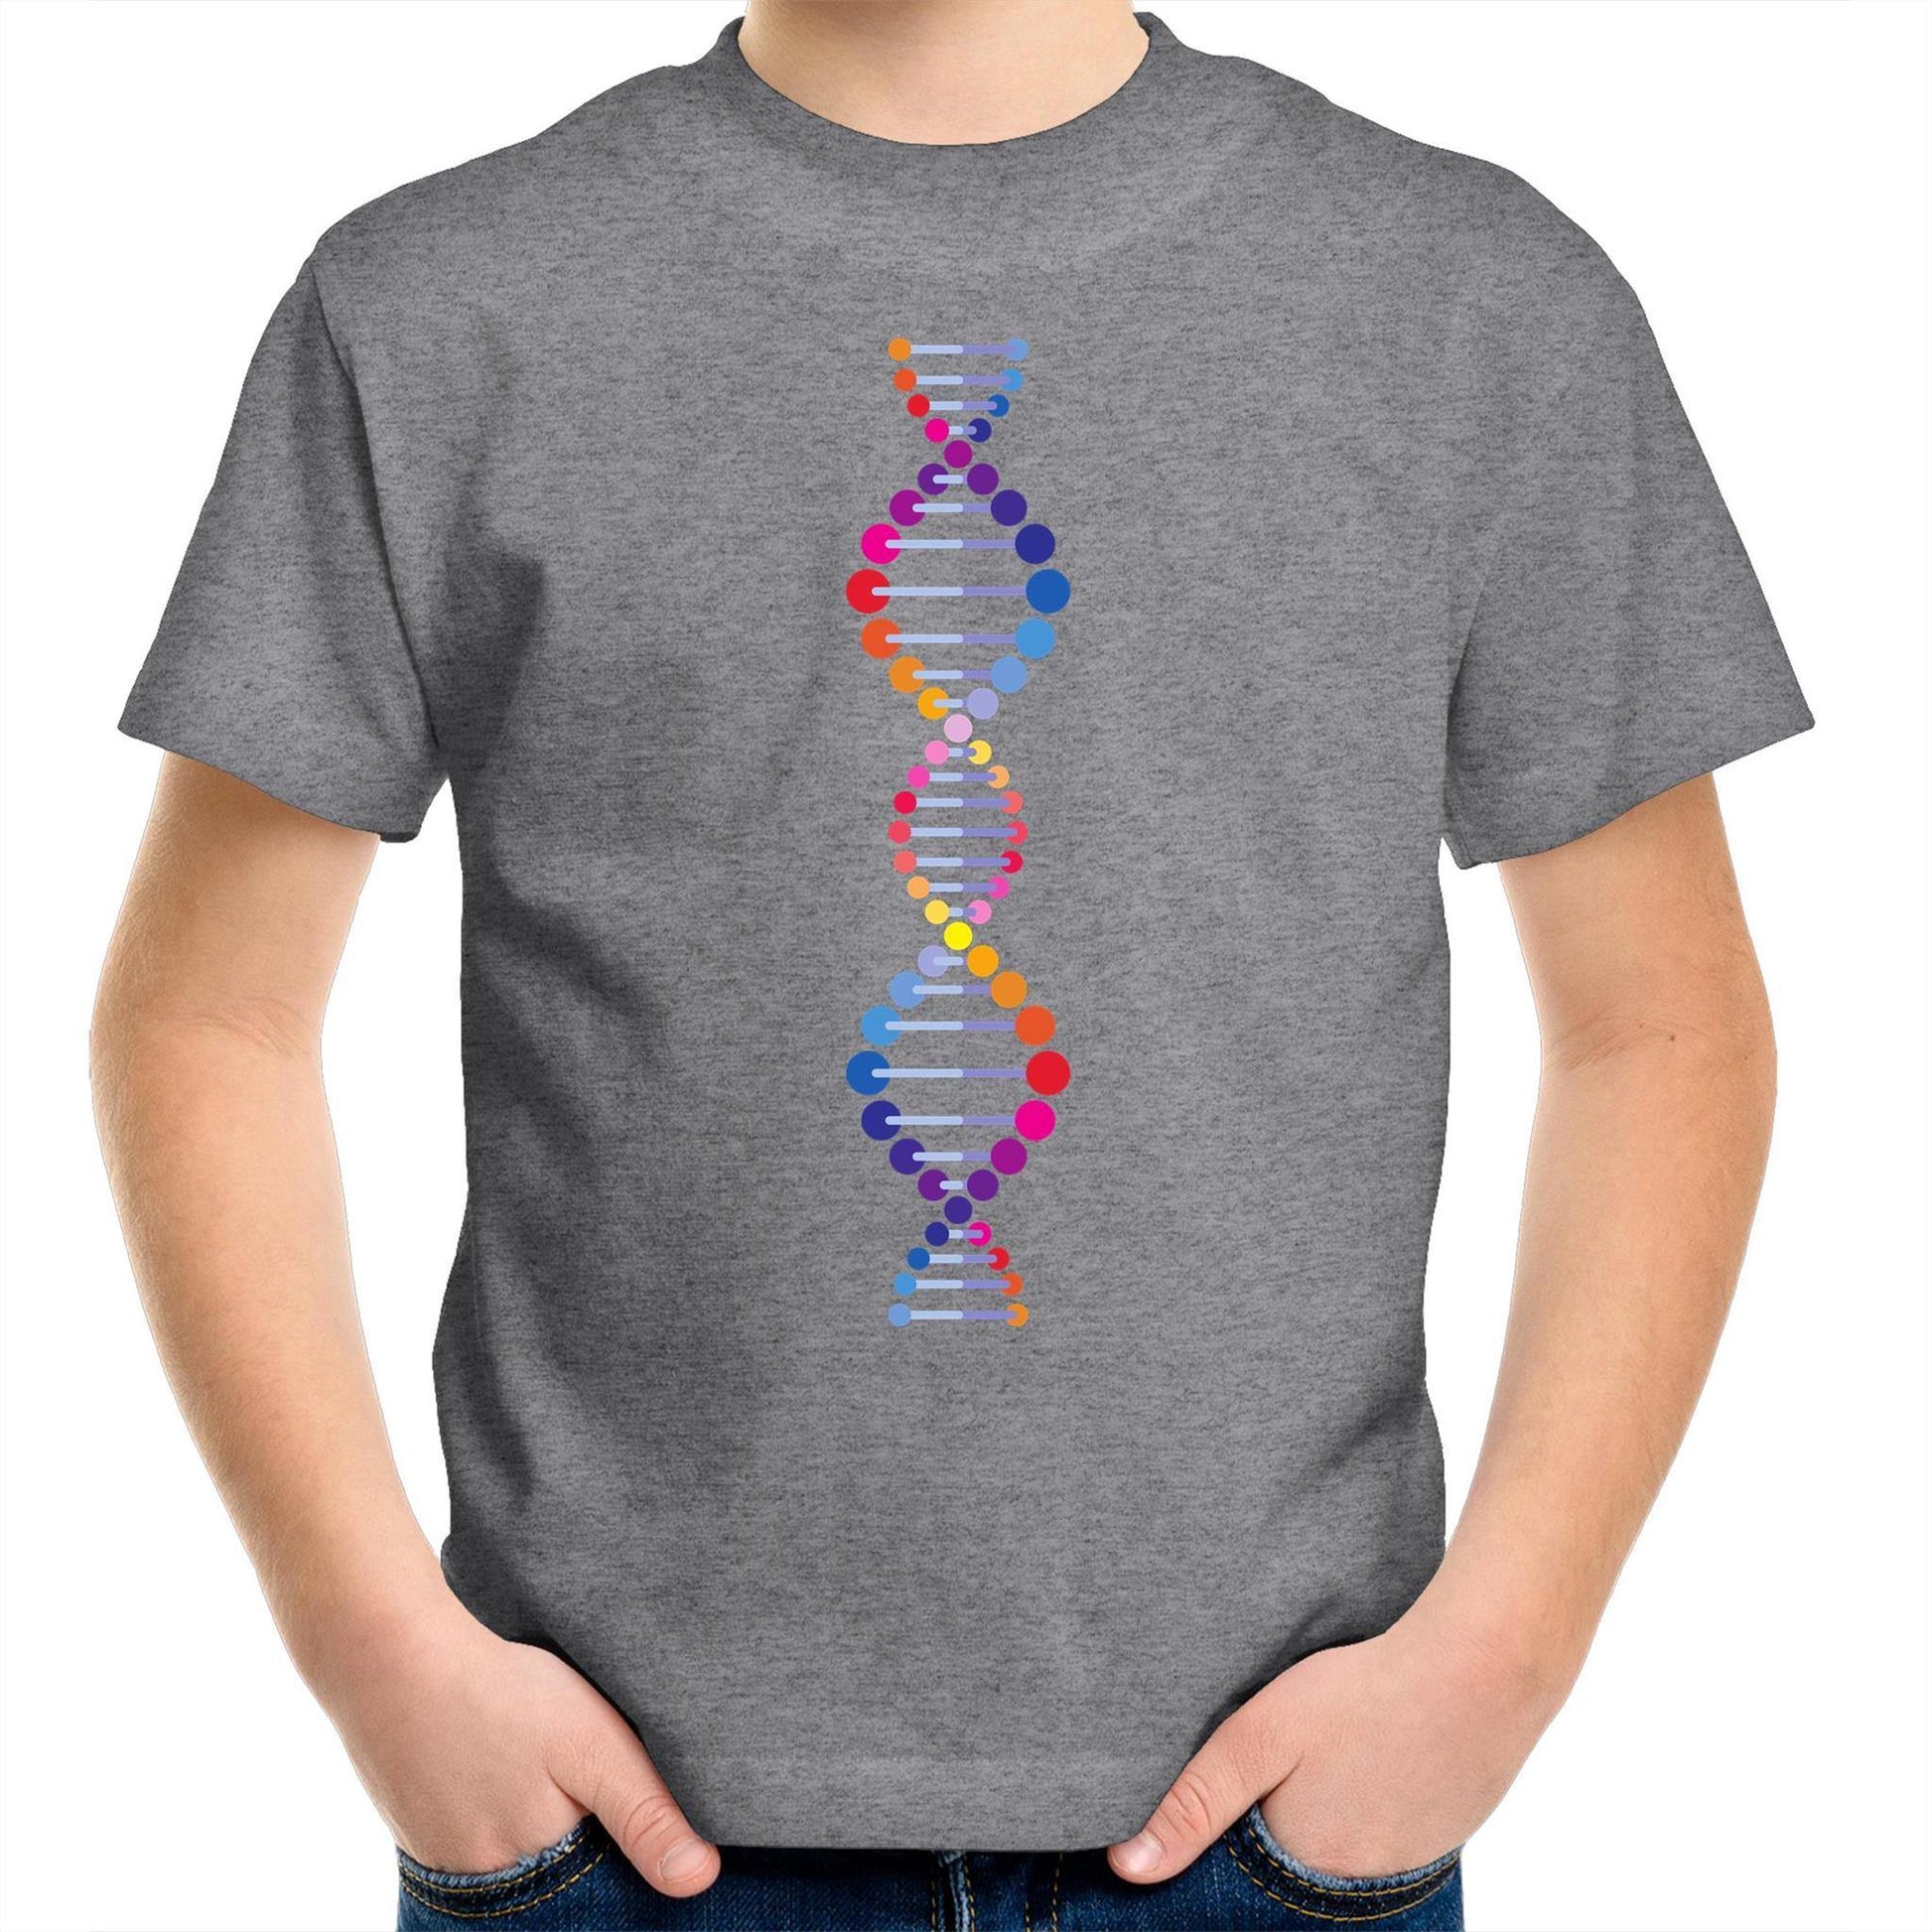 DNA - Kids Youth Crew T-Shirt Grey Marle Kids Youth T-shirt Science